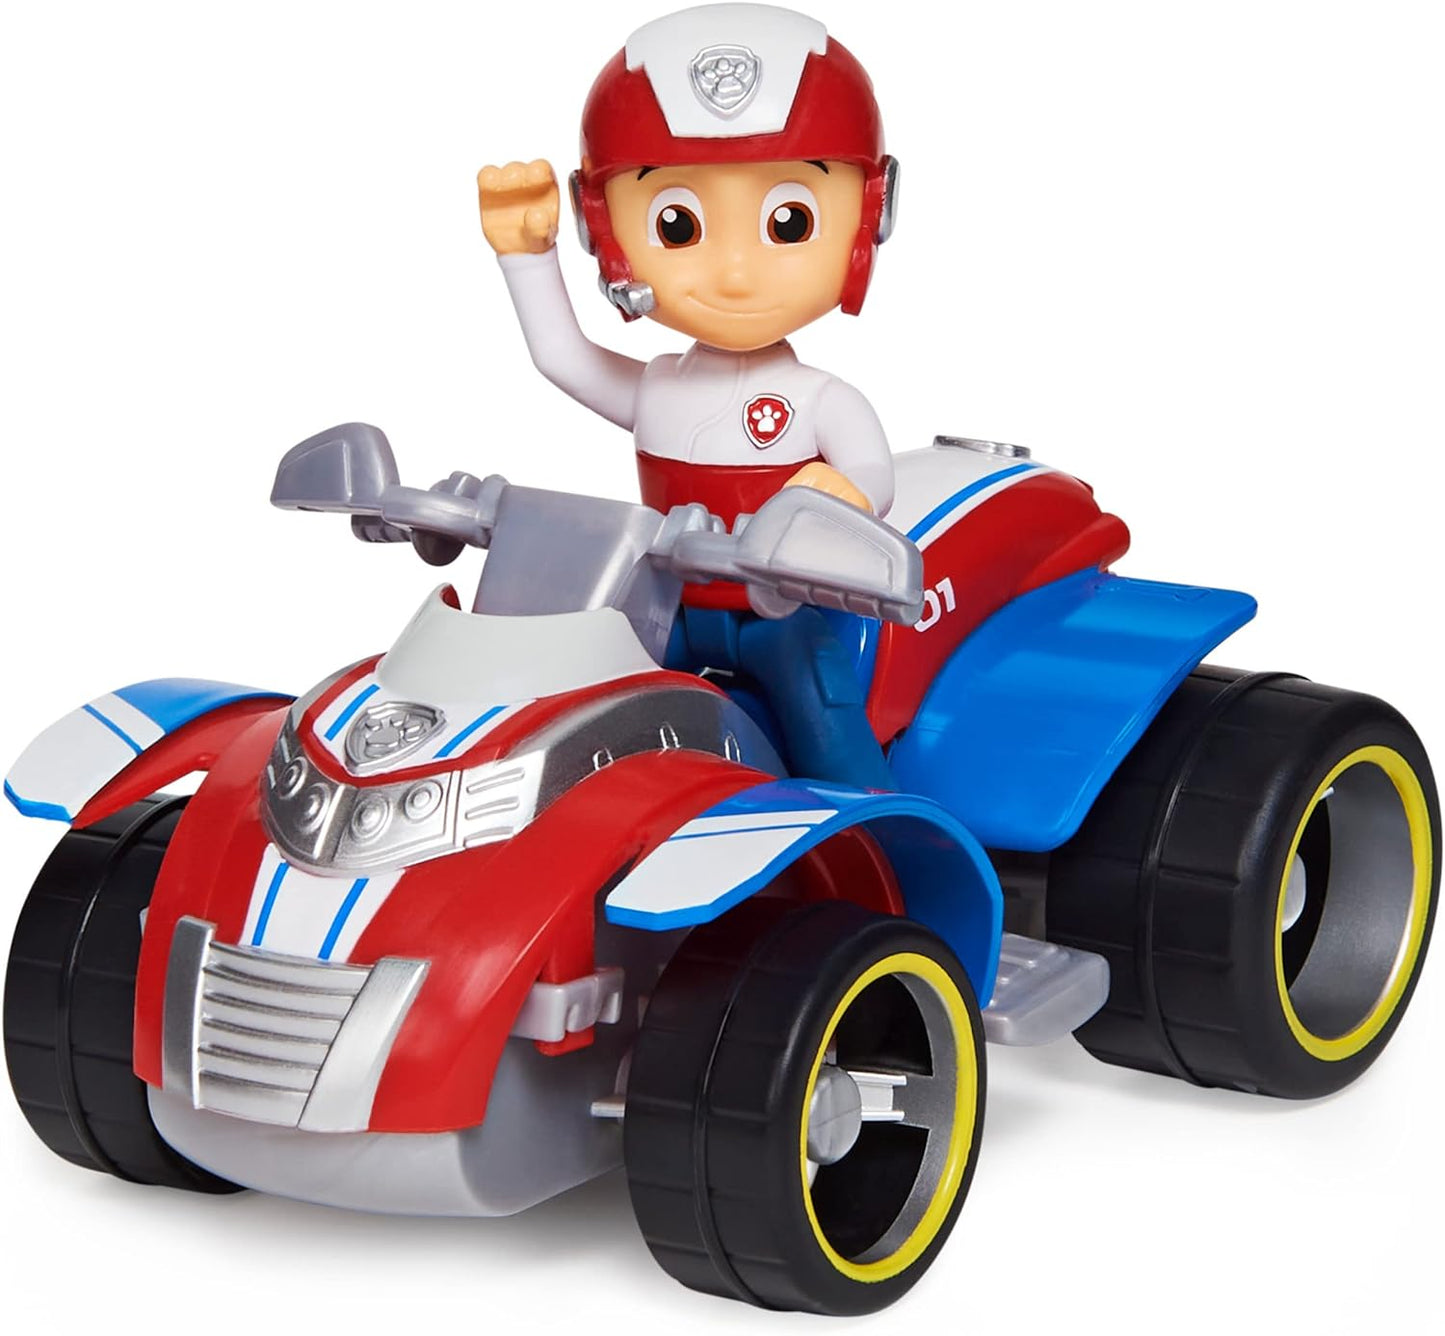 Paw Patrol  Ryder’s Rescue ATV Vehicle with Collectible Figure